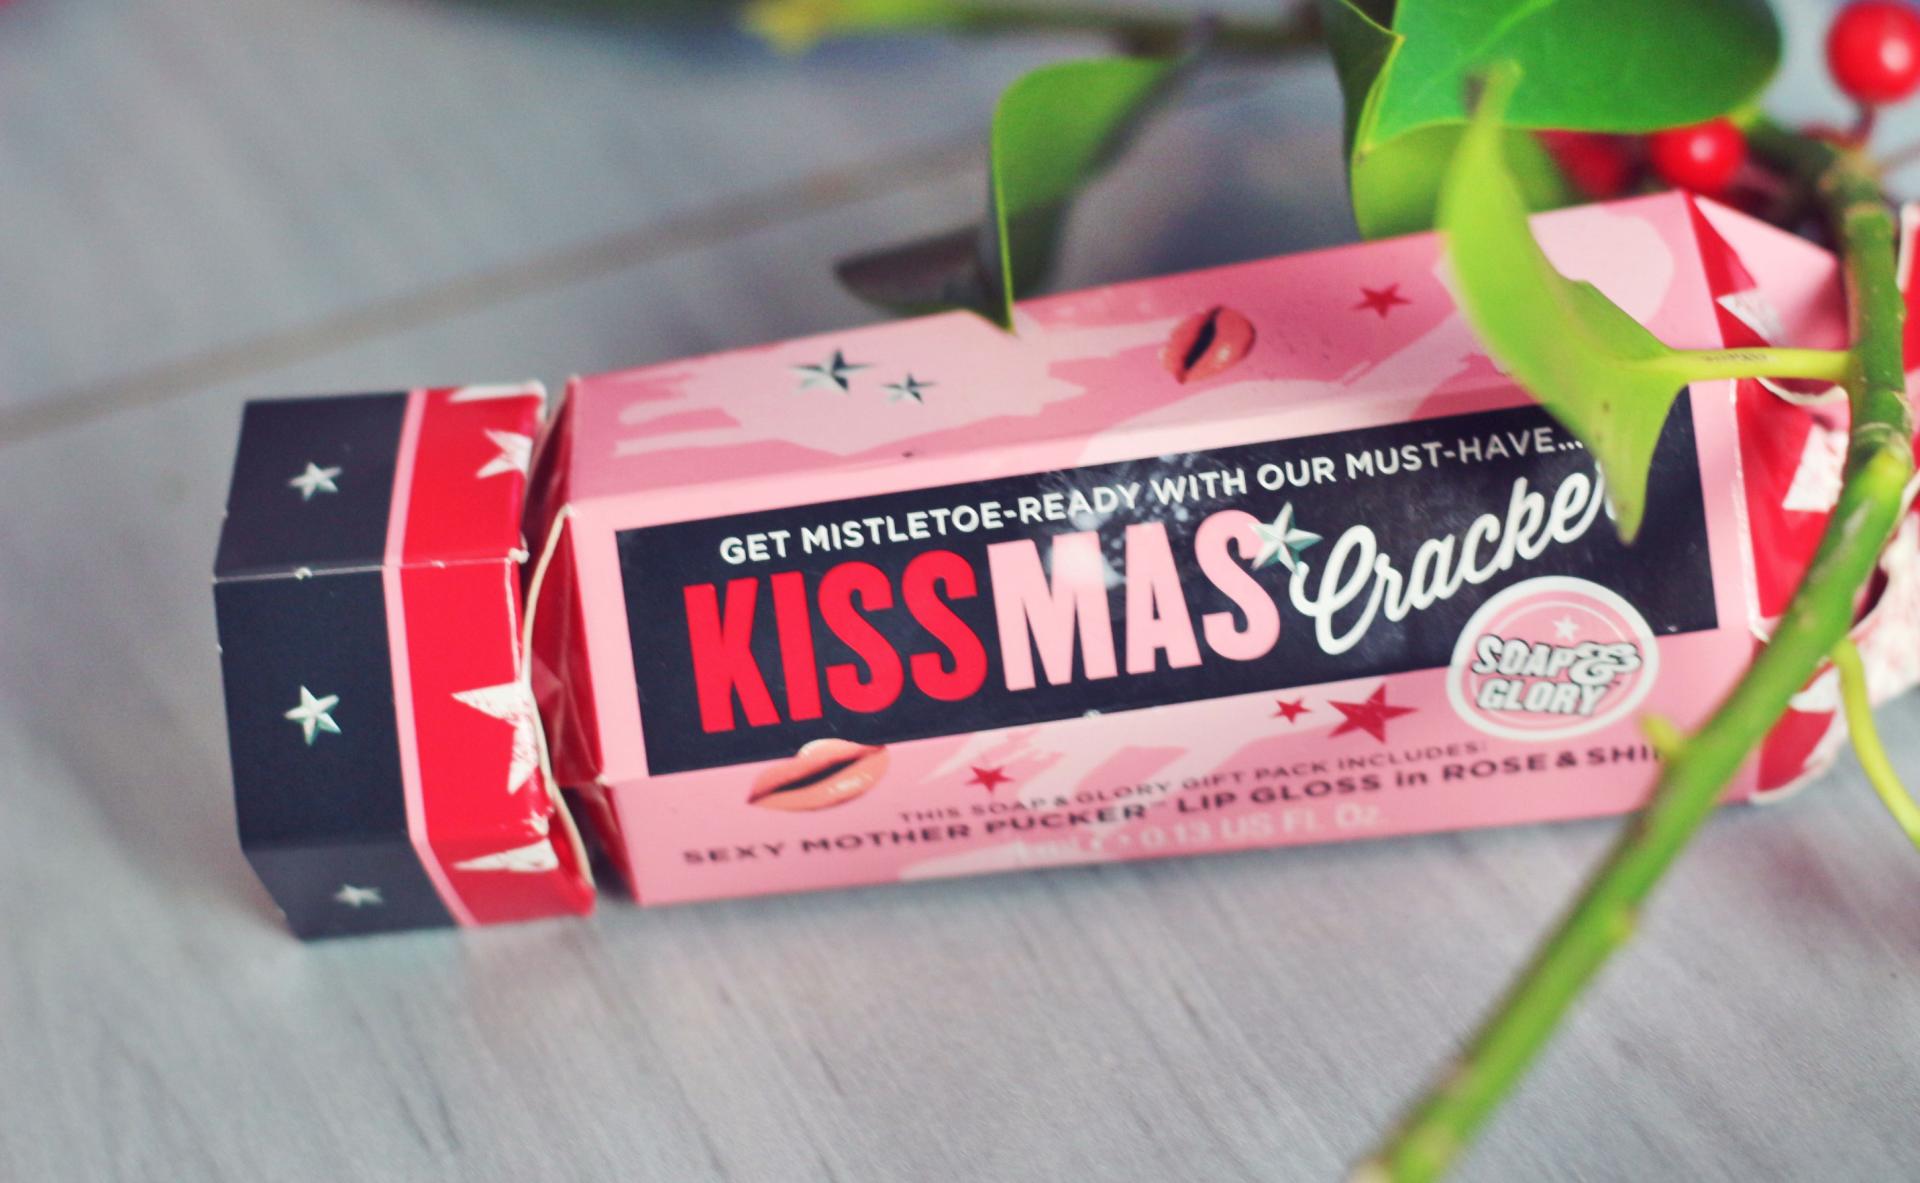 soap and glory christmas cracker stocking filler